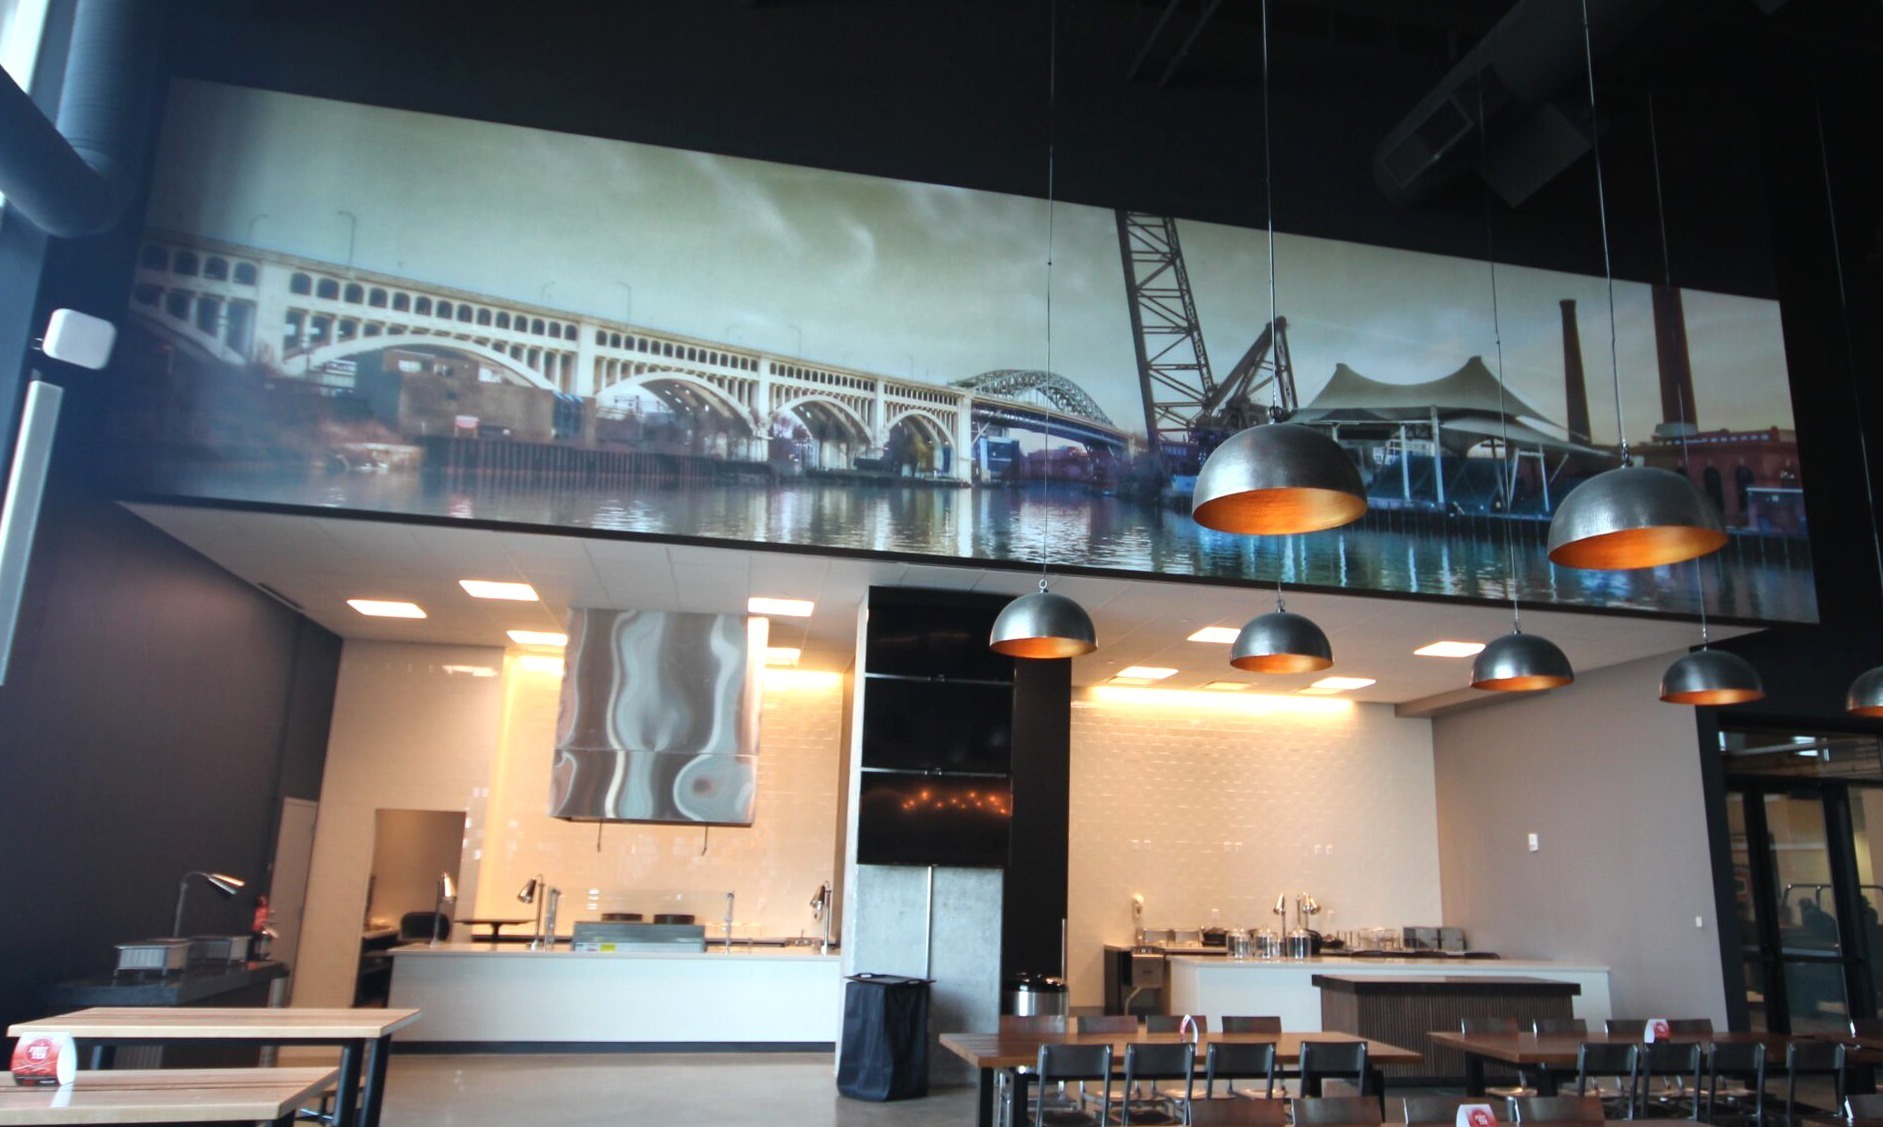 Vinyl wall decal installed in the Cleveland Browns Stadium Dining area